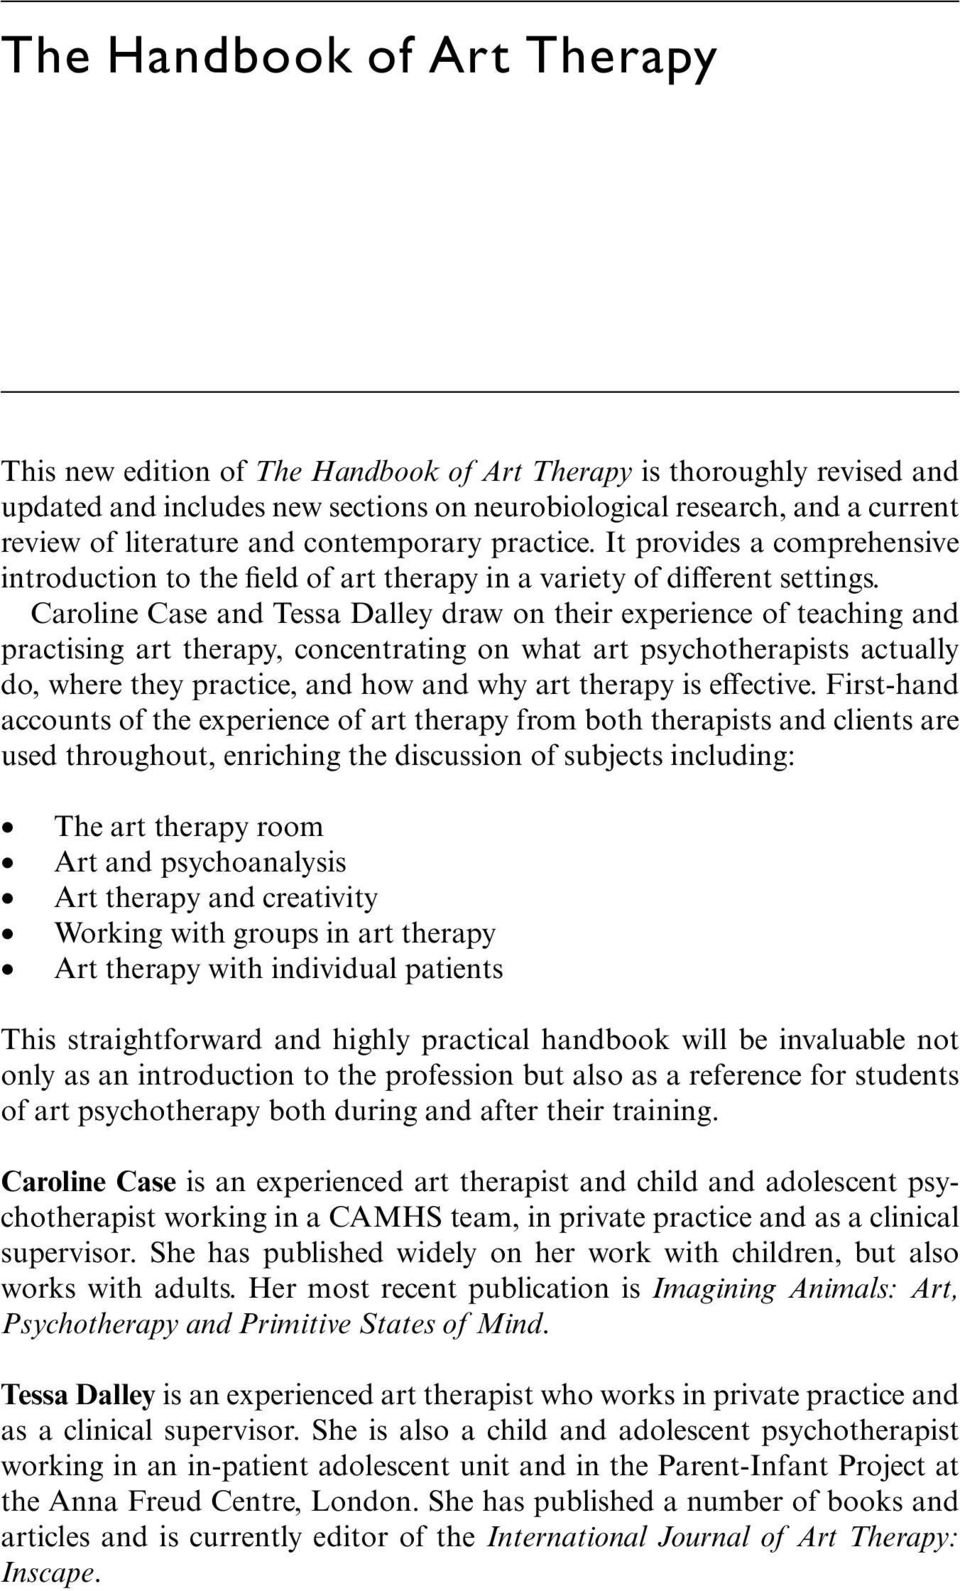 Caroline Case and Tessa Dalley draw on their experience of teaching and practising art therapy, concentrating on what art psychotherapists actually do, where they practice, and how and why art